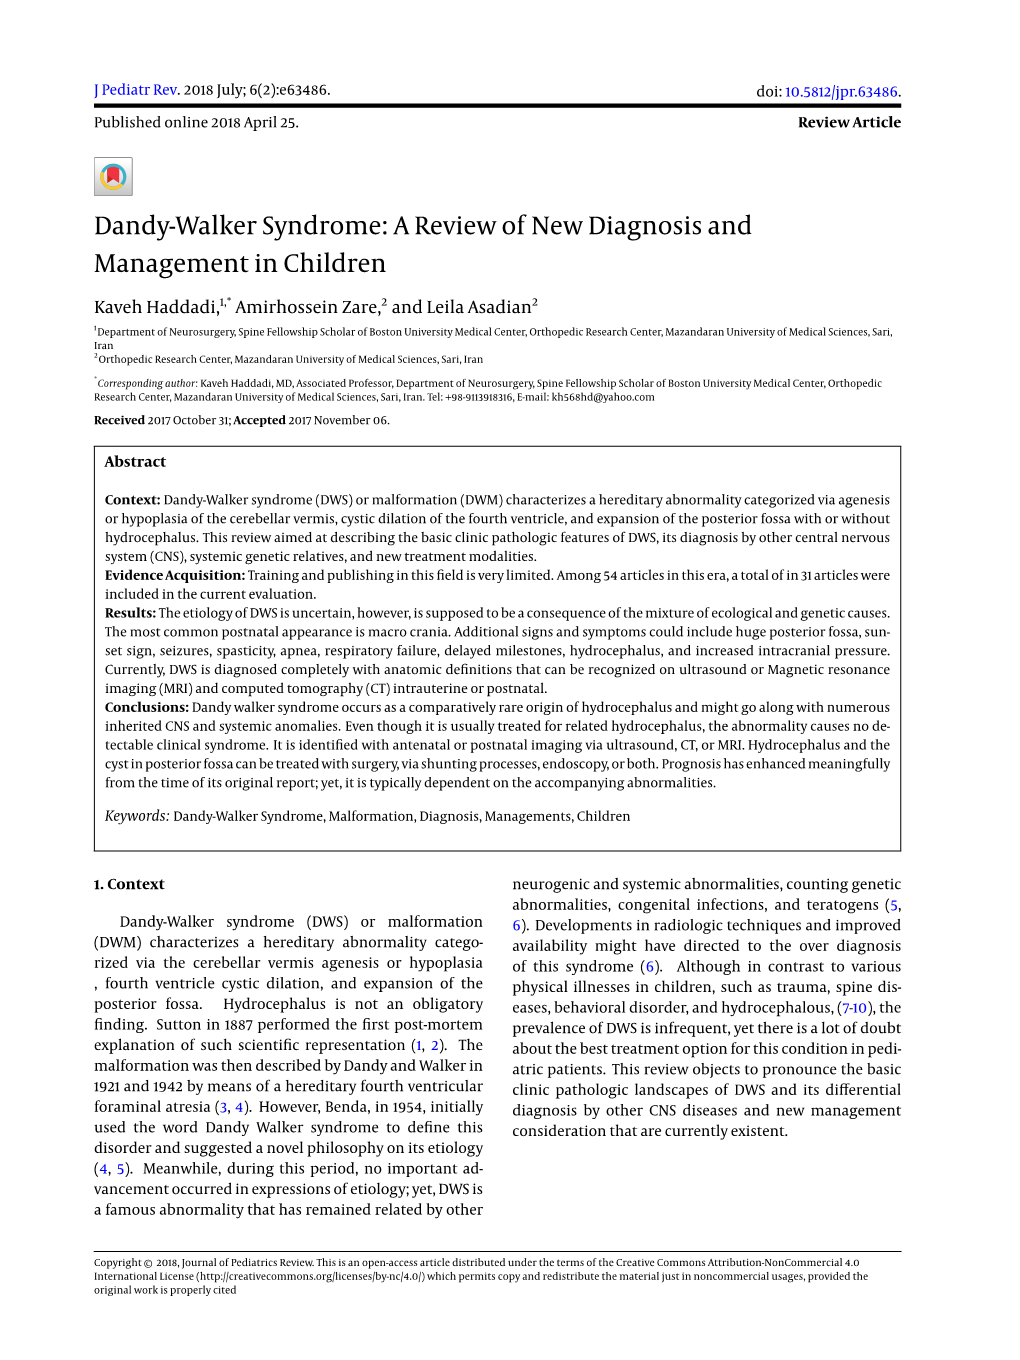 Dandy-Walker Syndrome: a Review of New Diagnosis and Management in Children